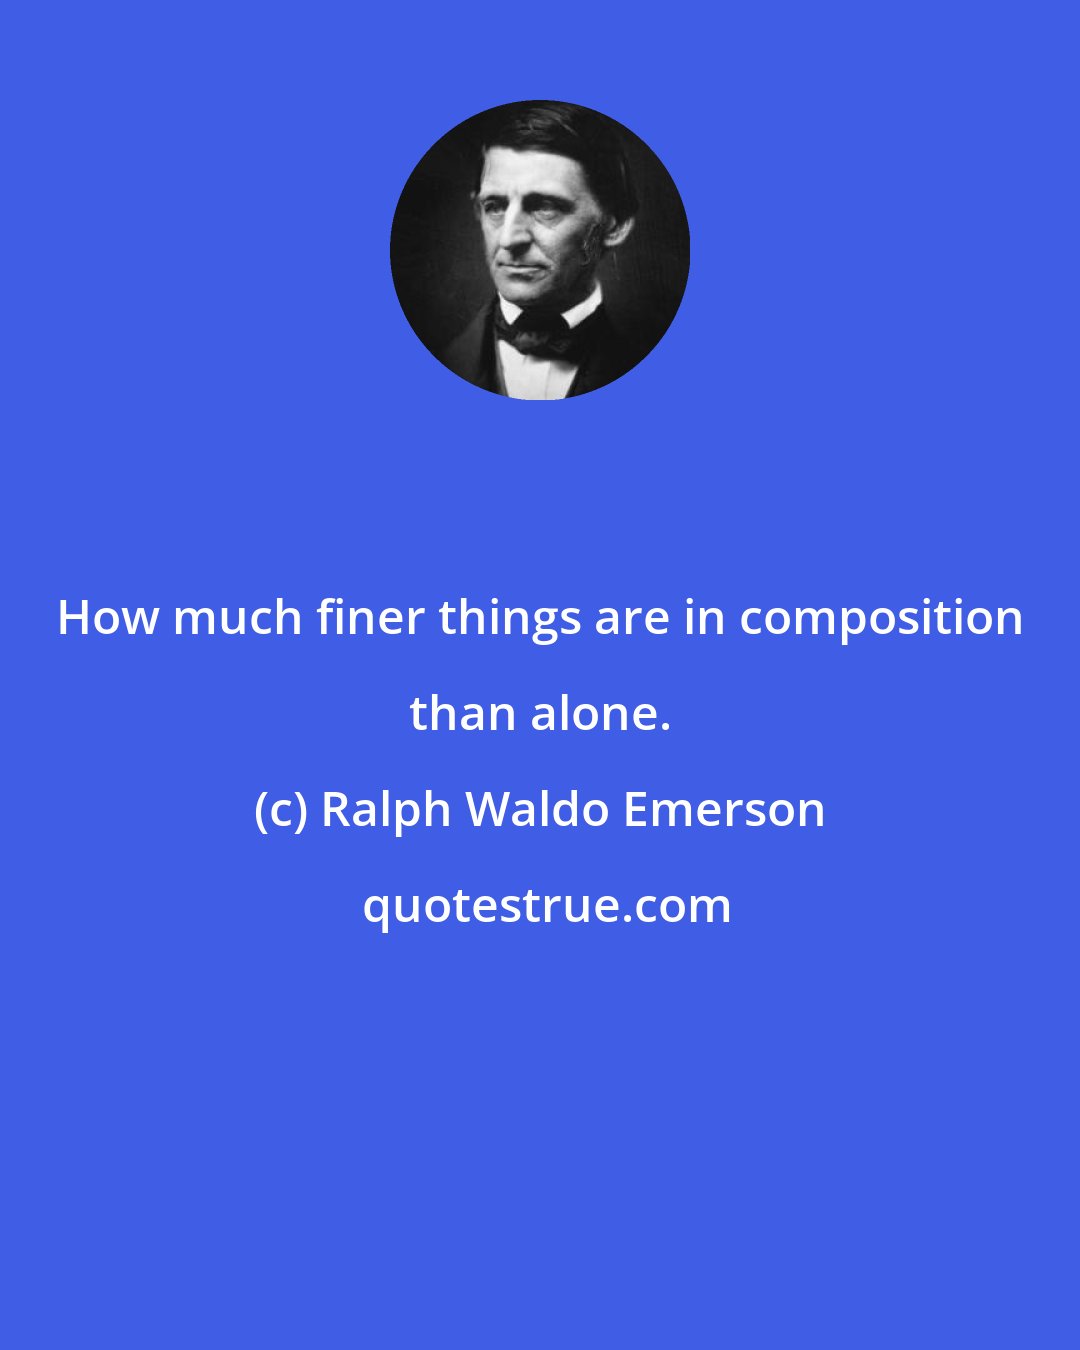 Ralph Waldo Emerson: How much finer things are in composition than alone.